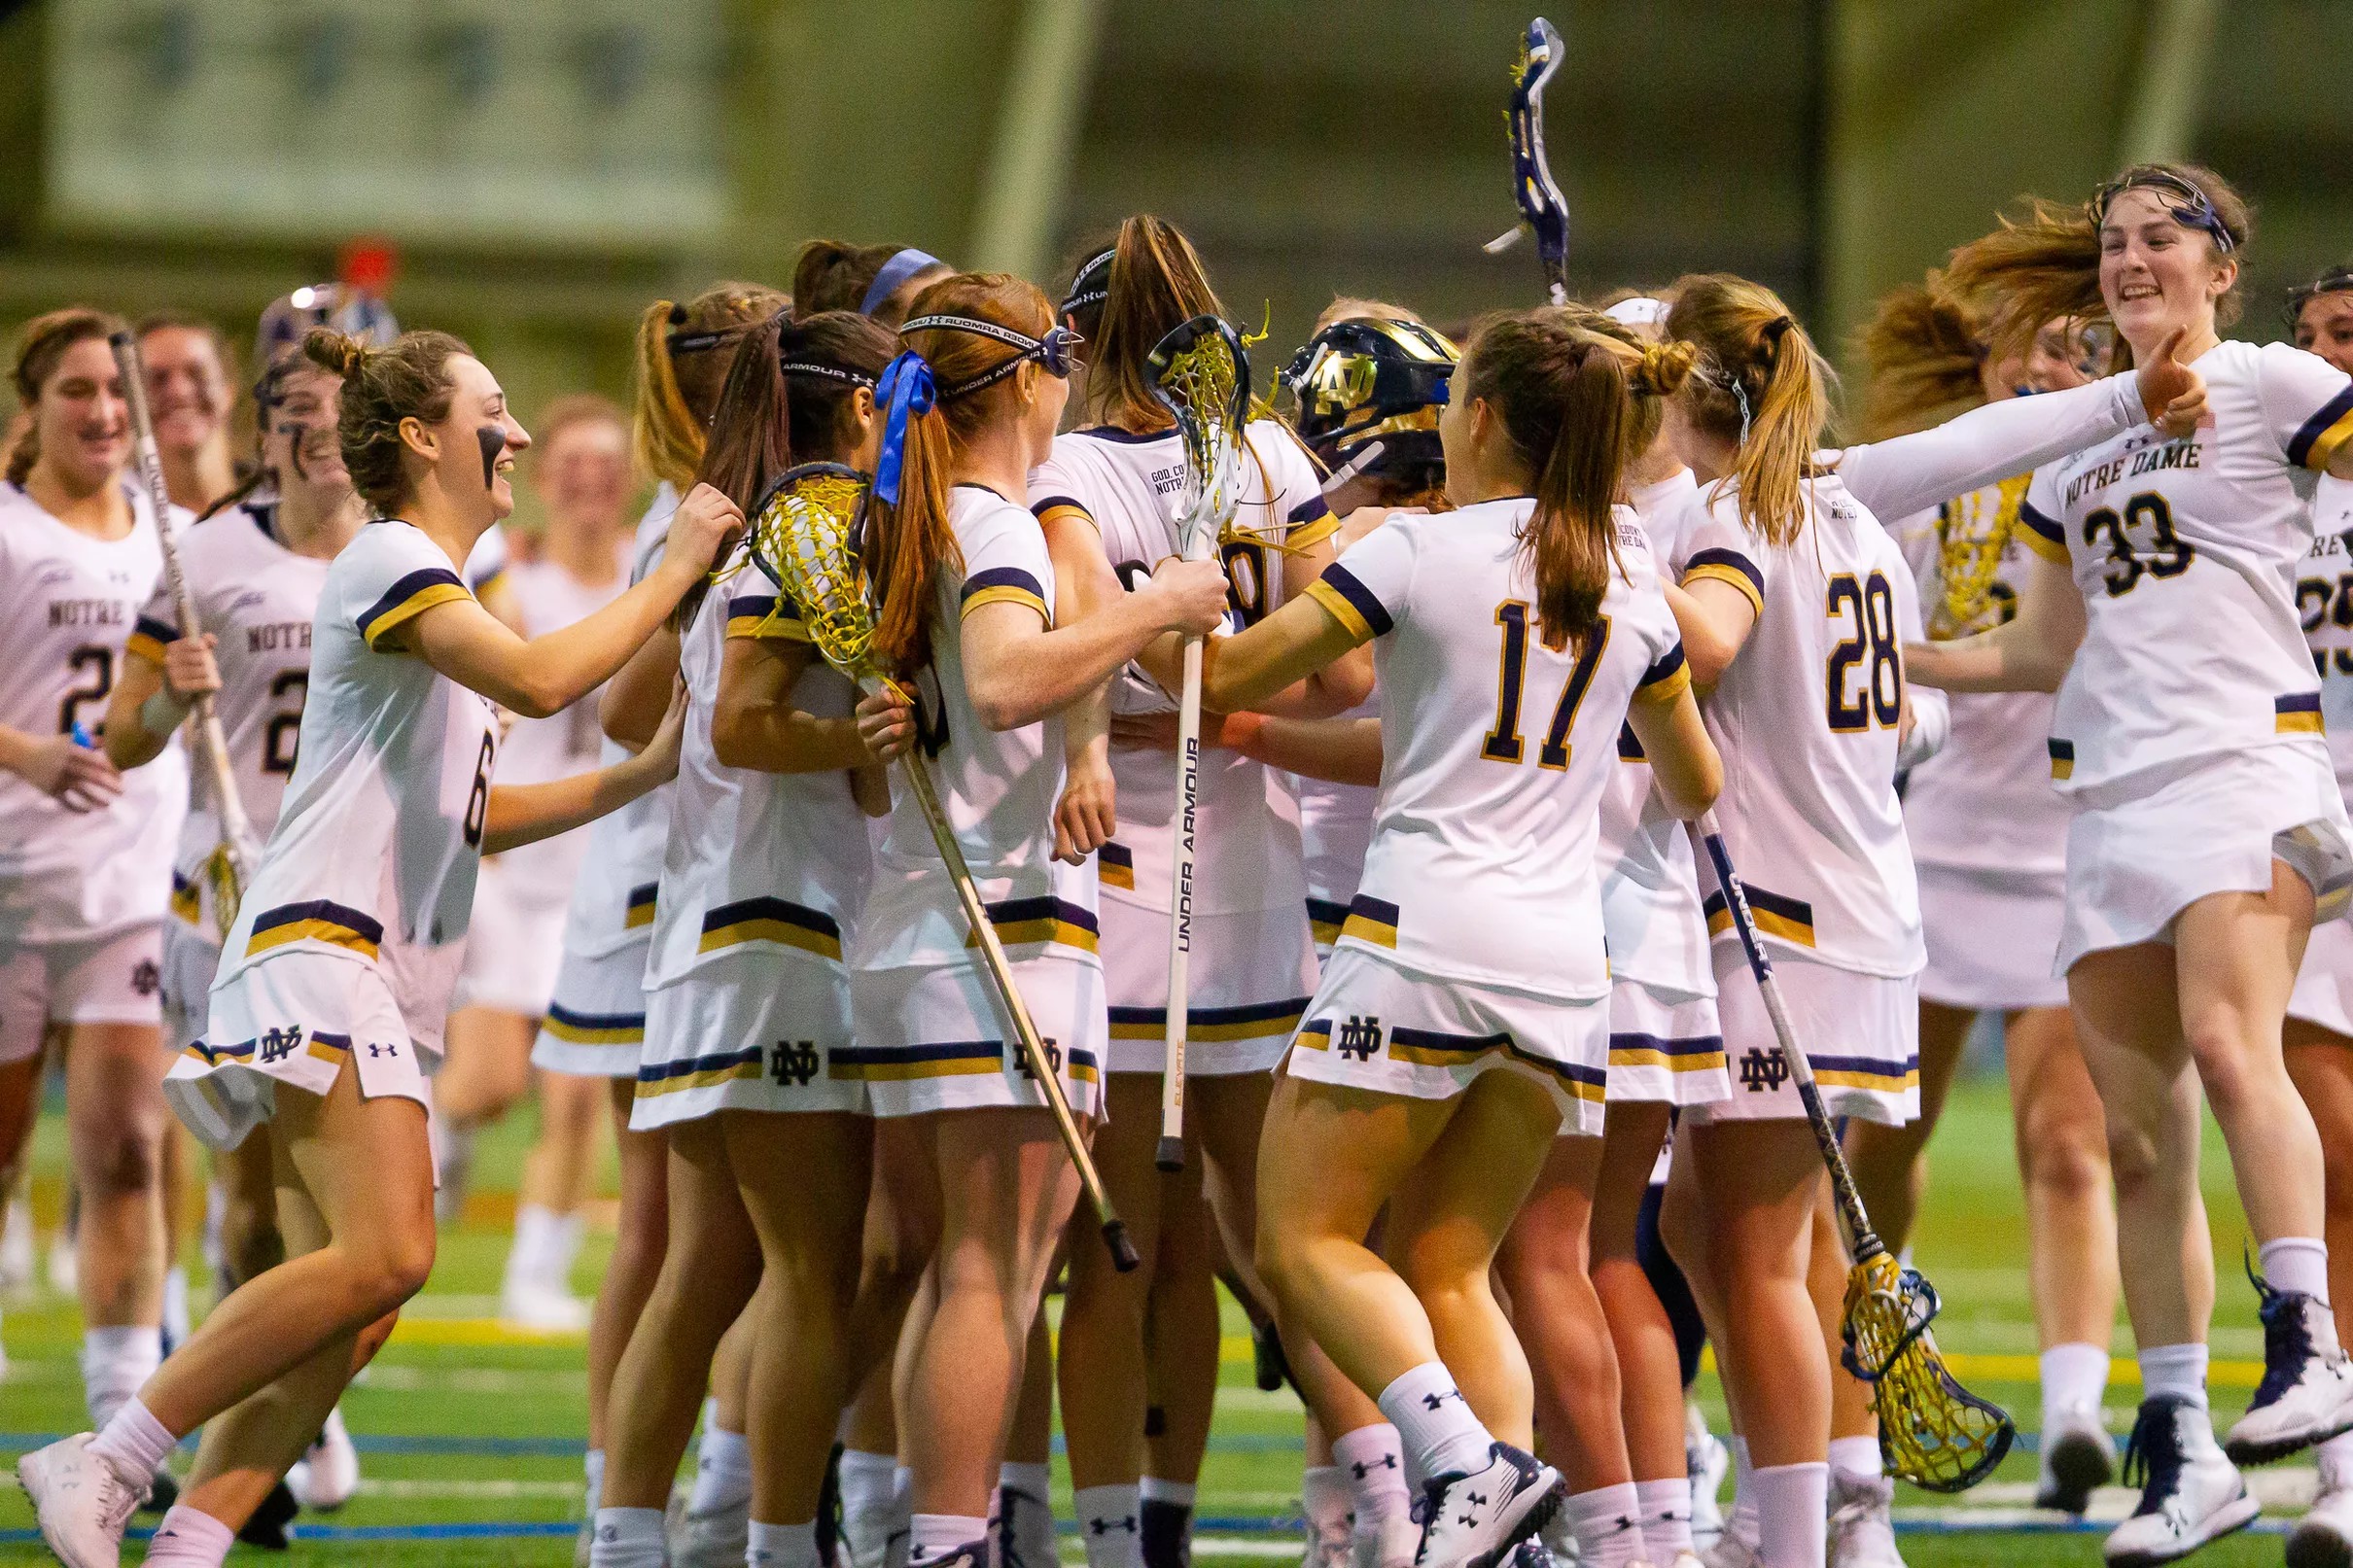 Notre Dame Women’s Lacrosse Irish Flashes Past Kent State in 270 Drubbing